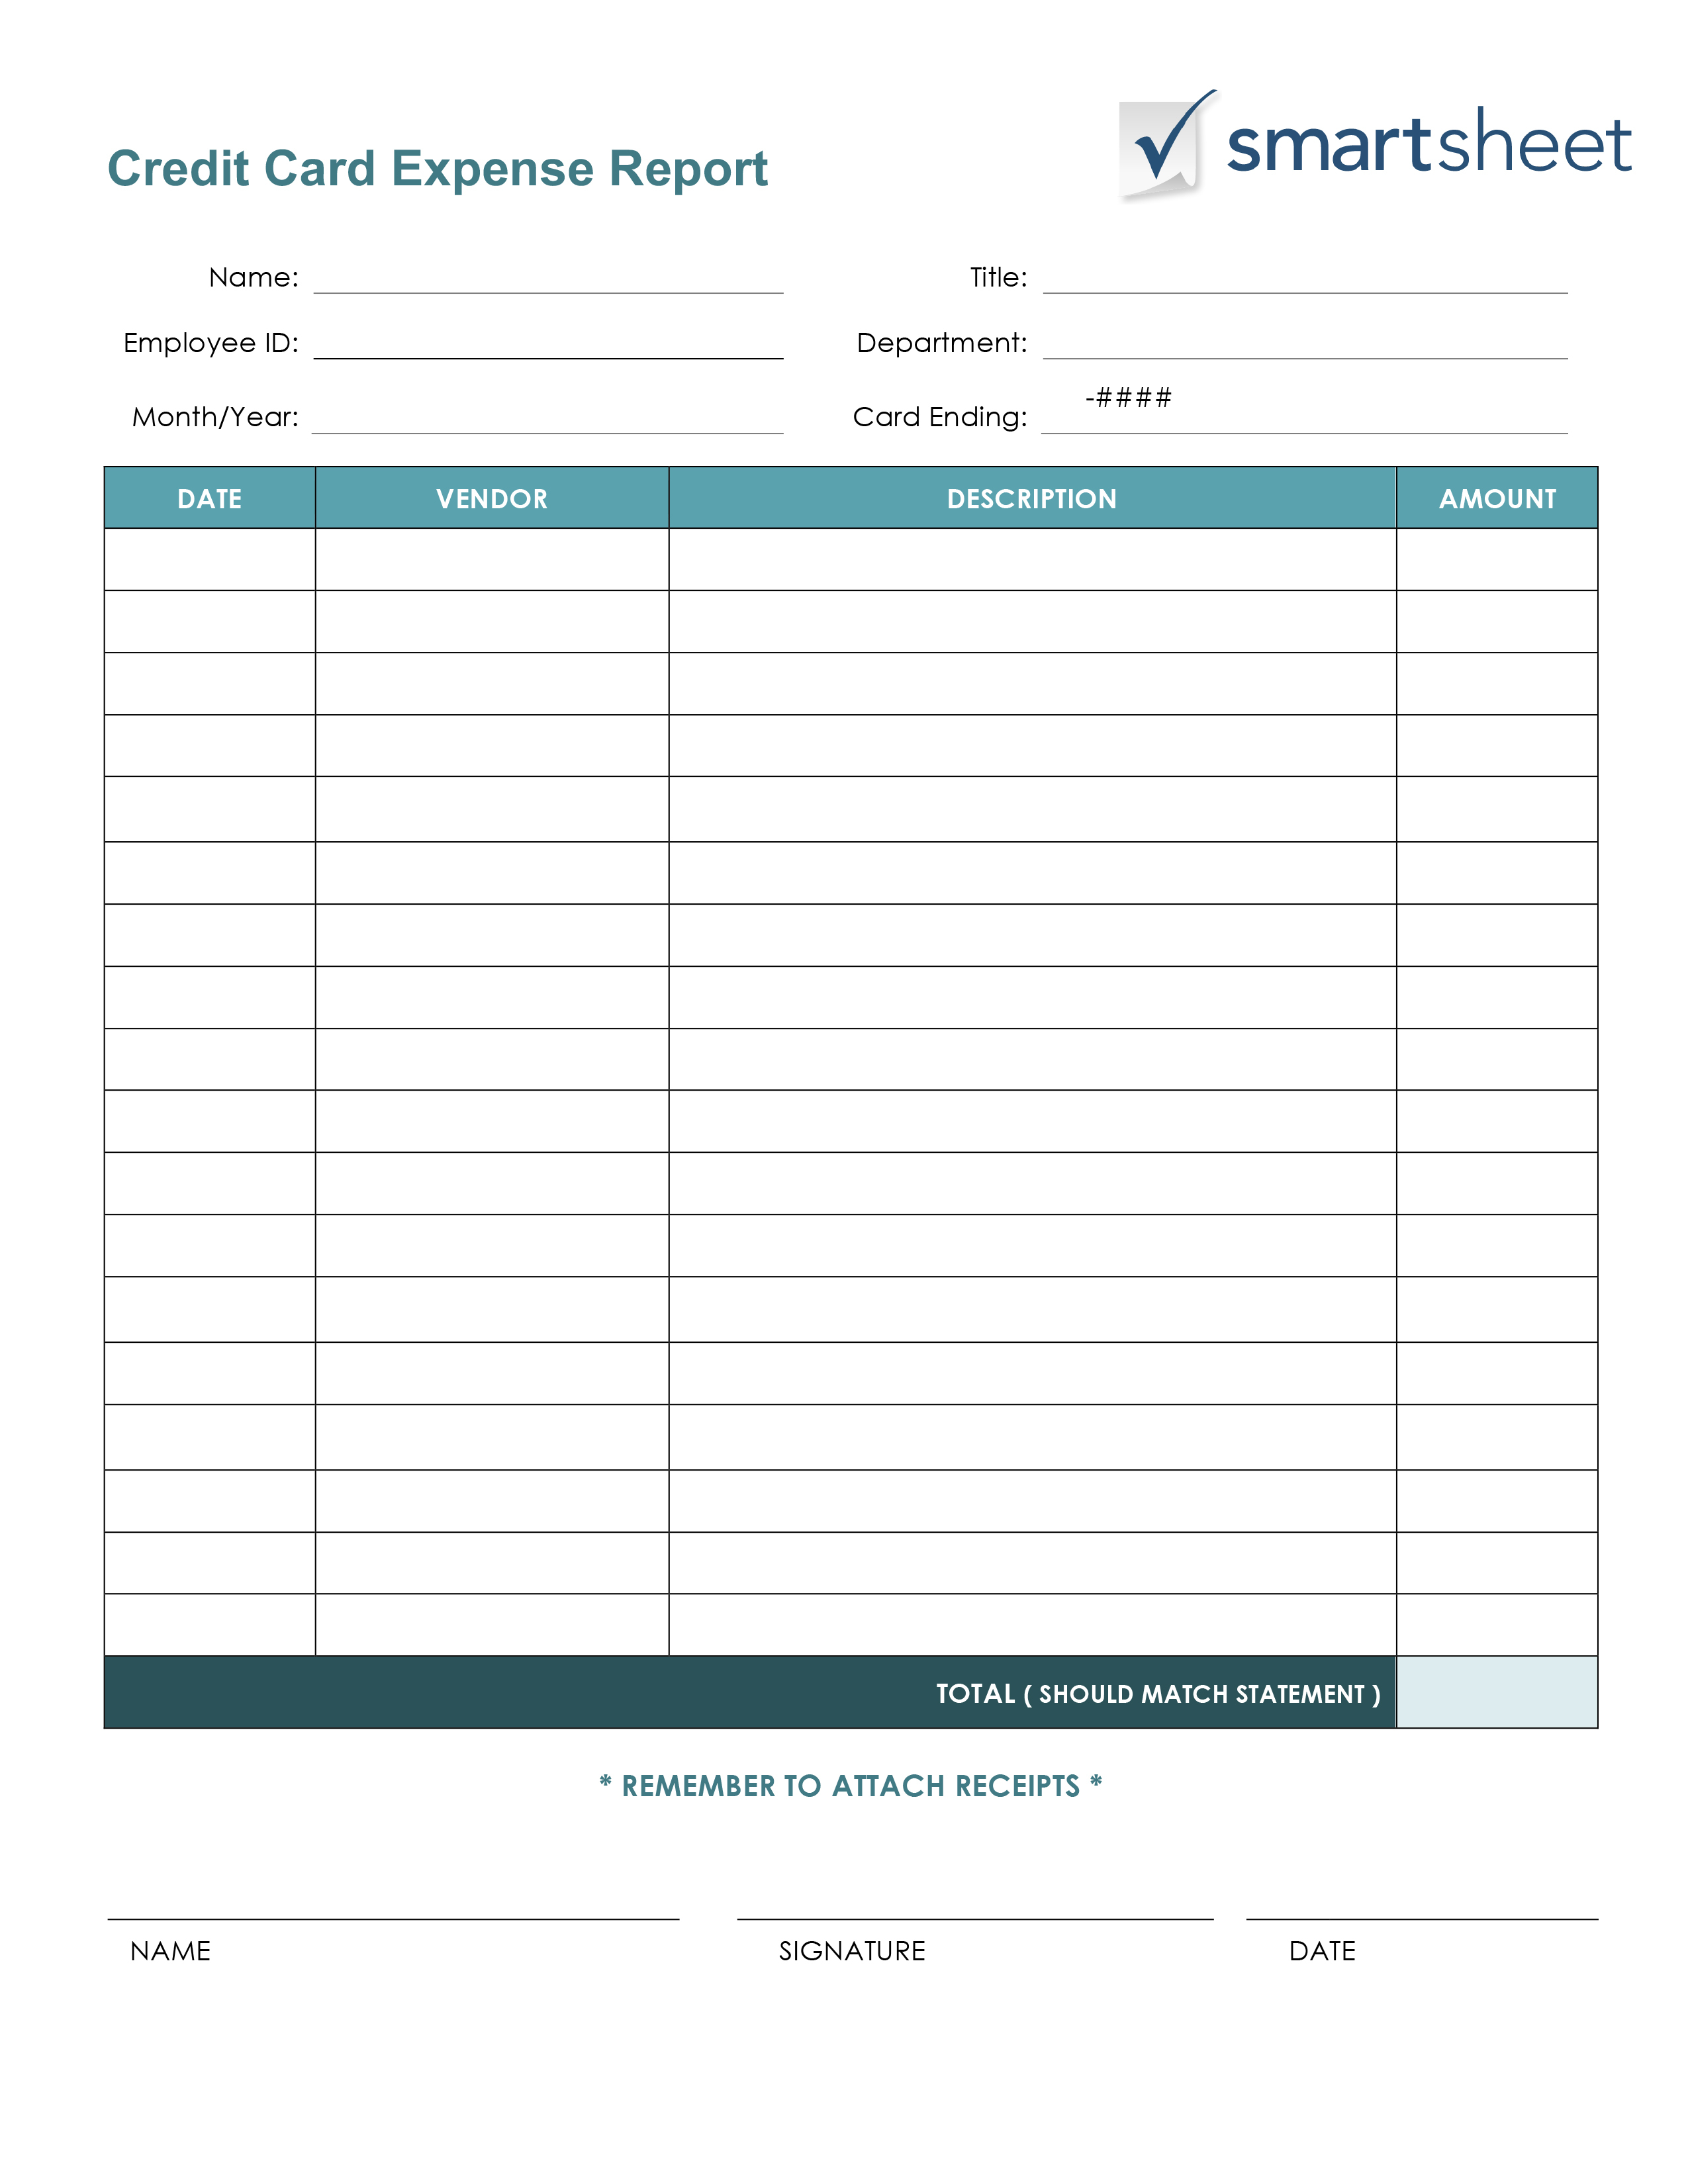 Free Expense Report Templates Smartsheet And Business Expenses List Template